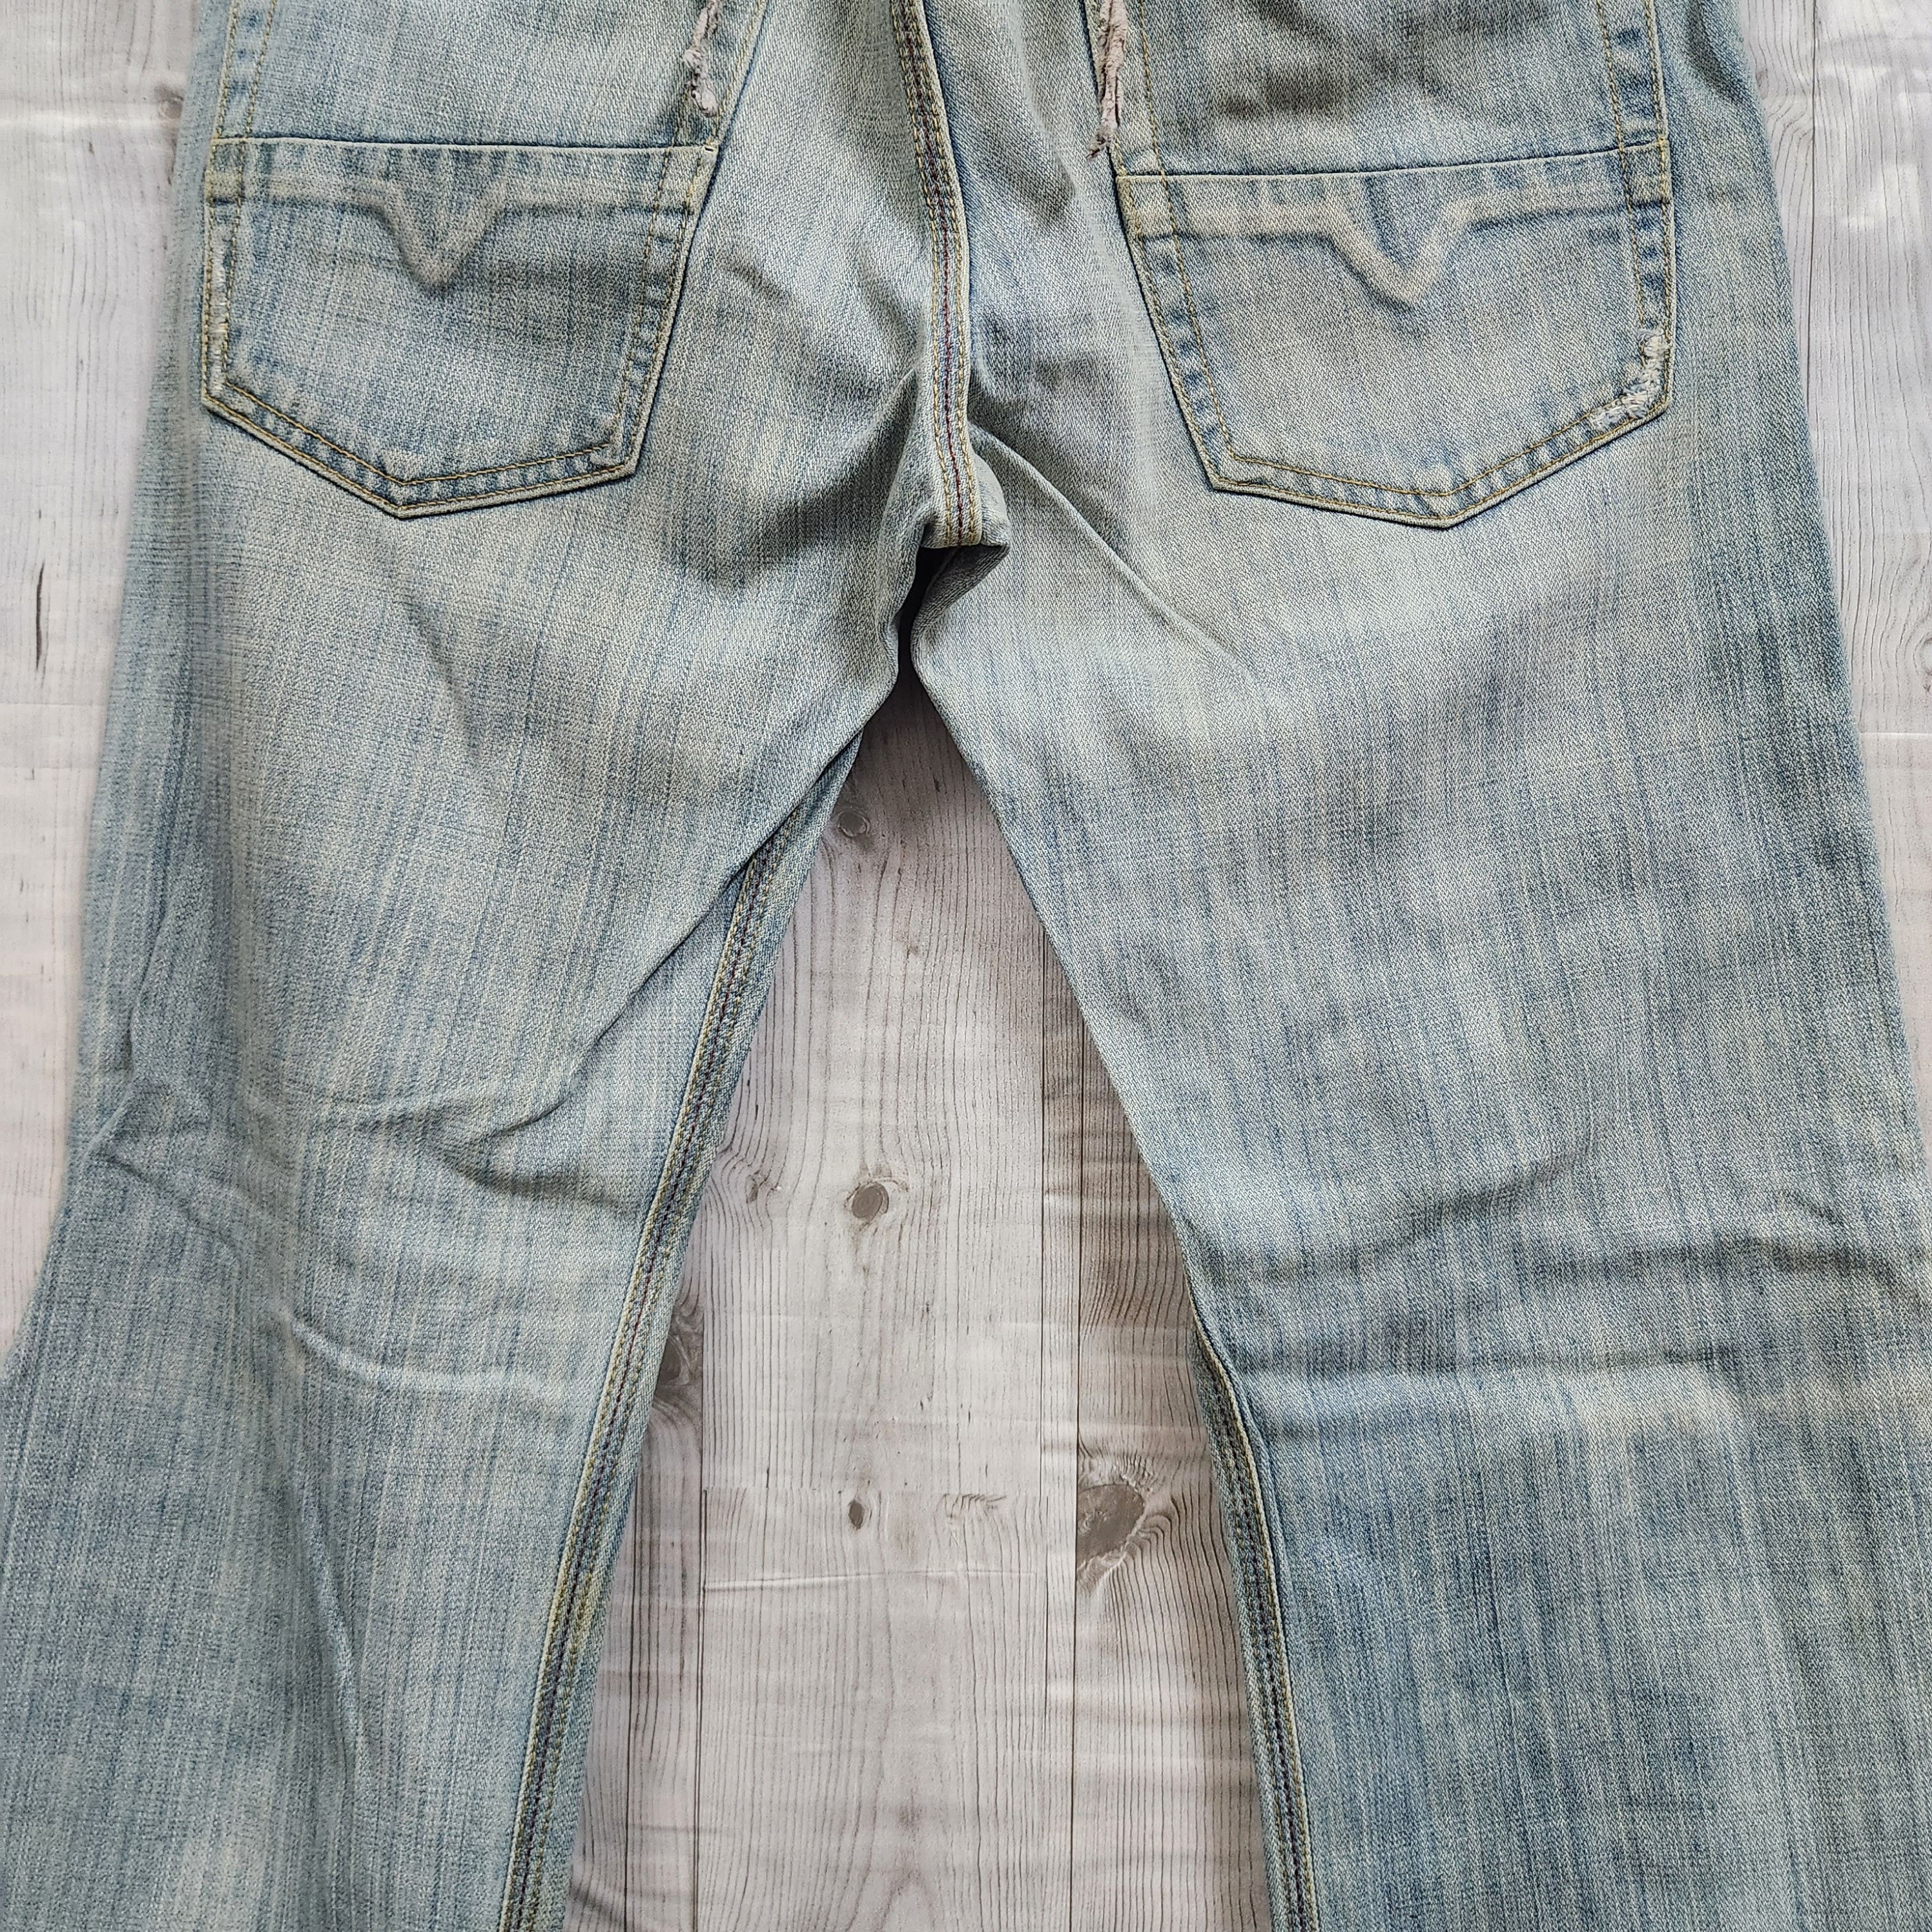 Mudwash Diesel Vintage Two Buttons Jeans Italy - 9